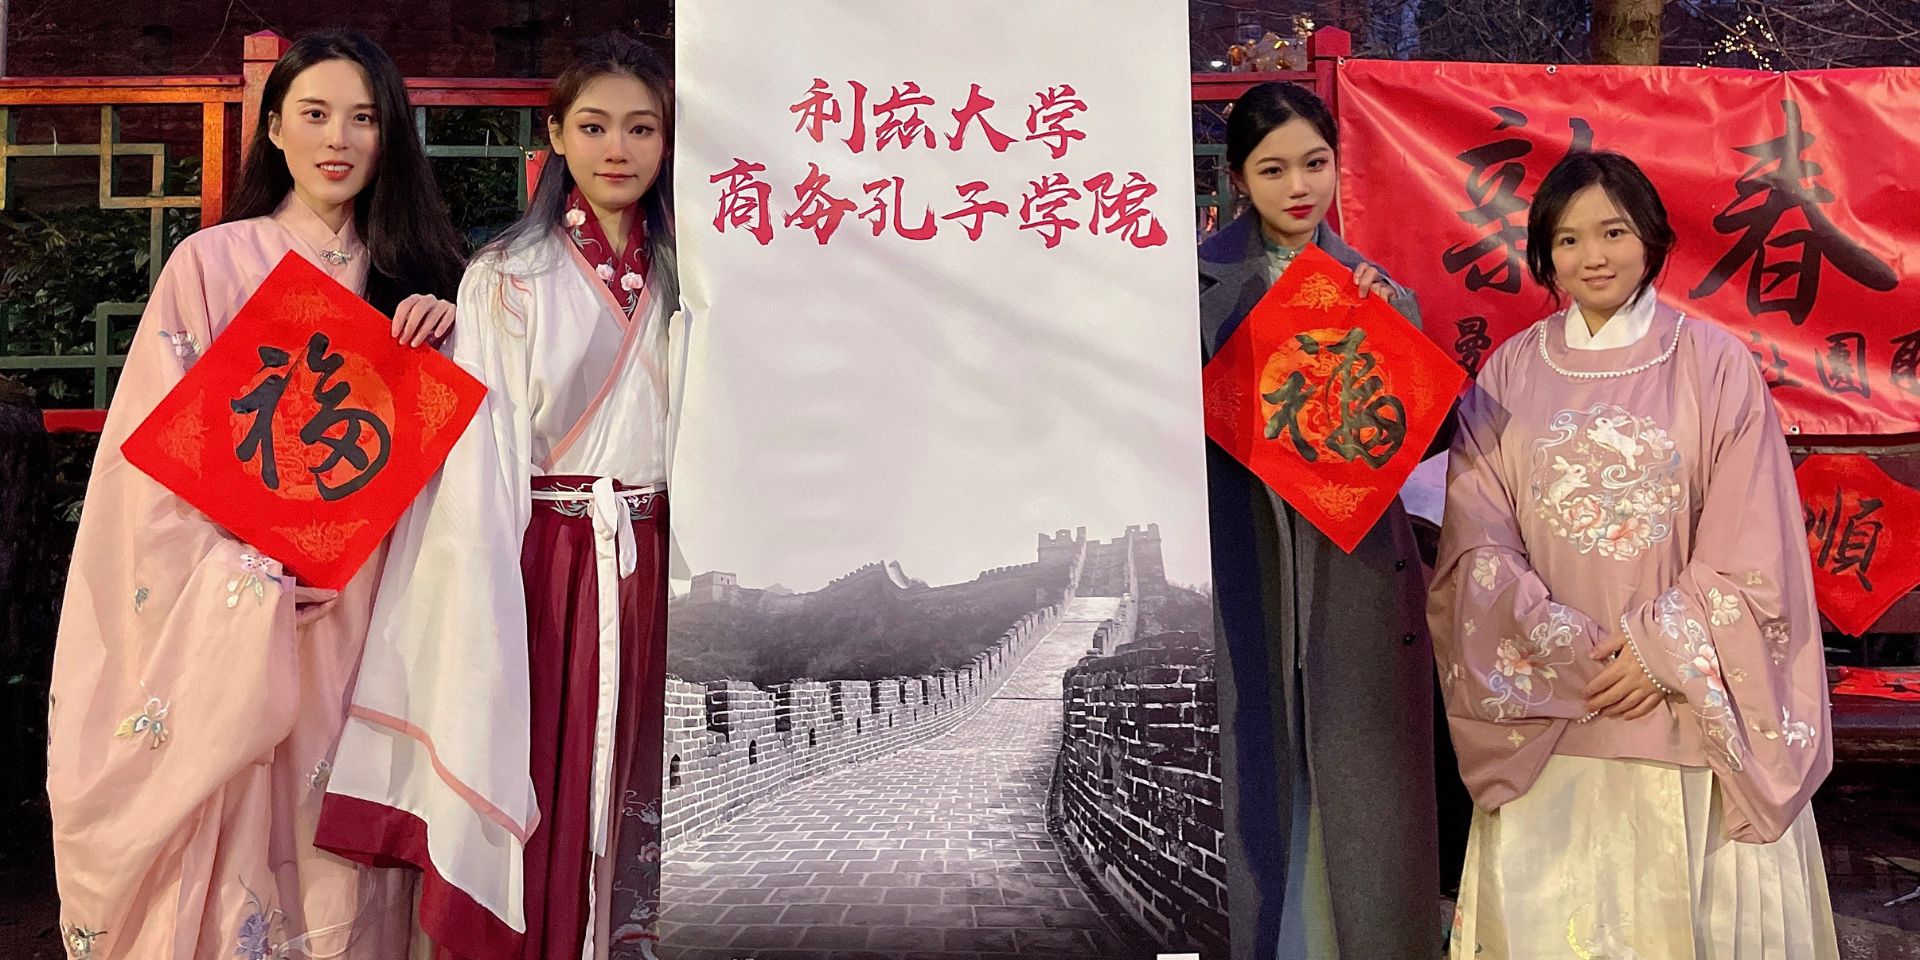 Four Chinese women wearing traditional Chinese clothing